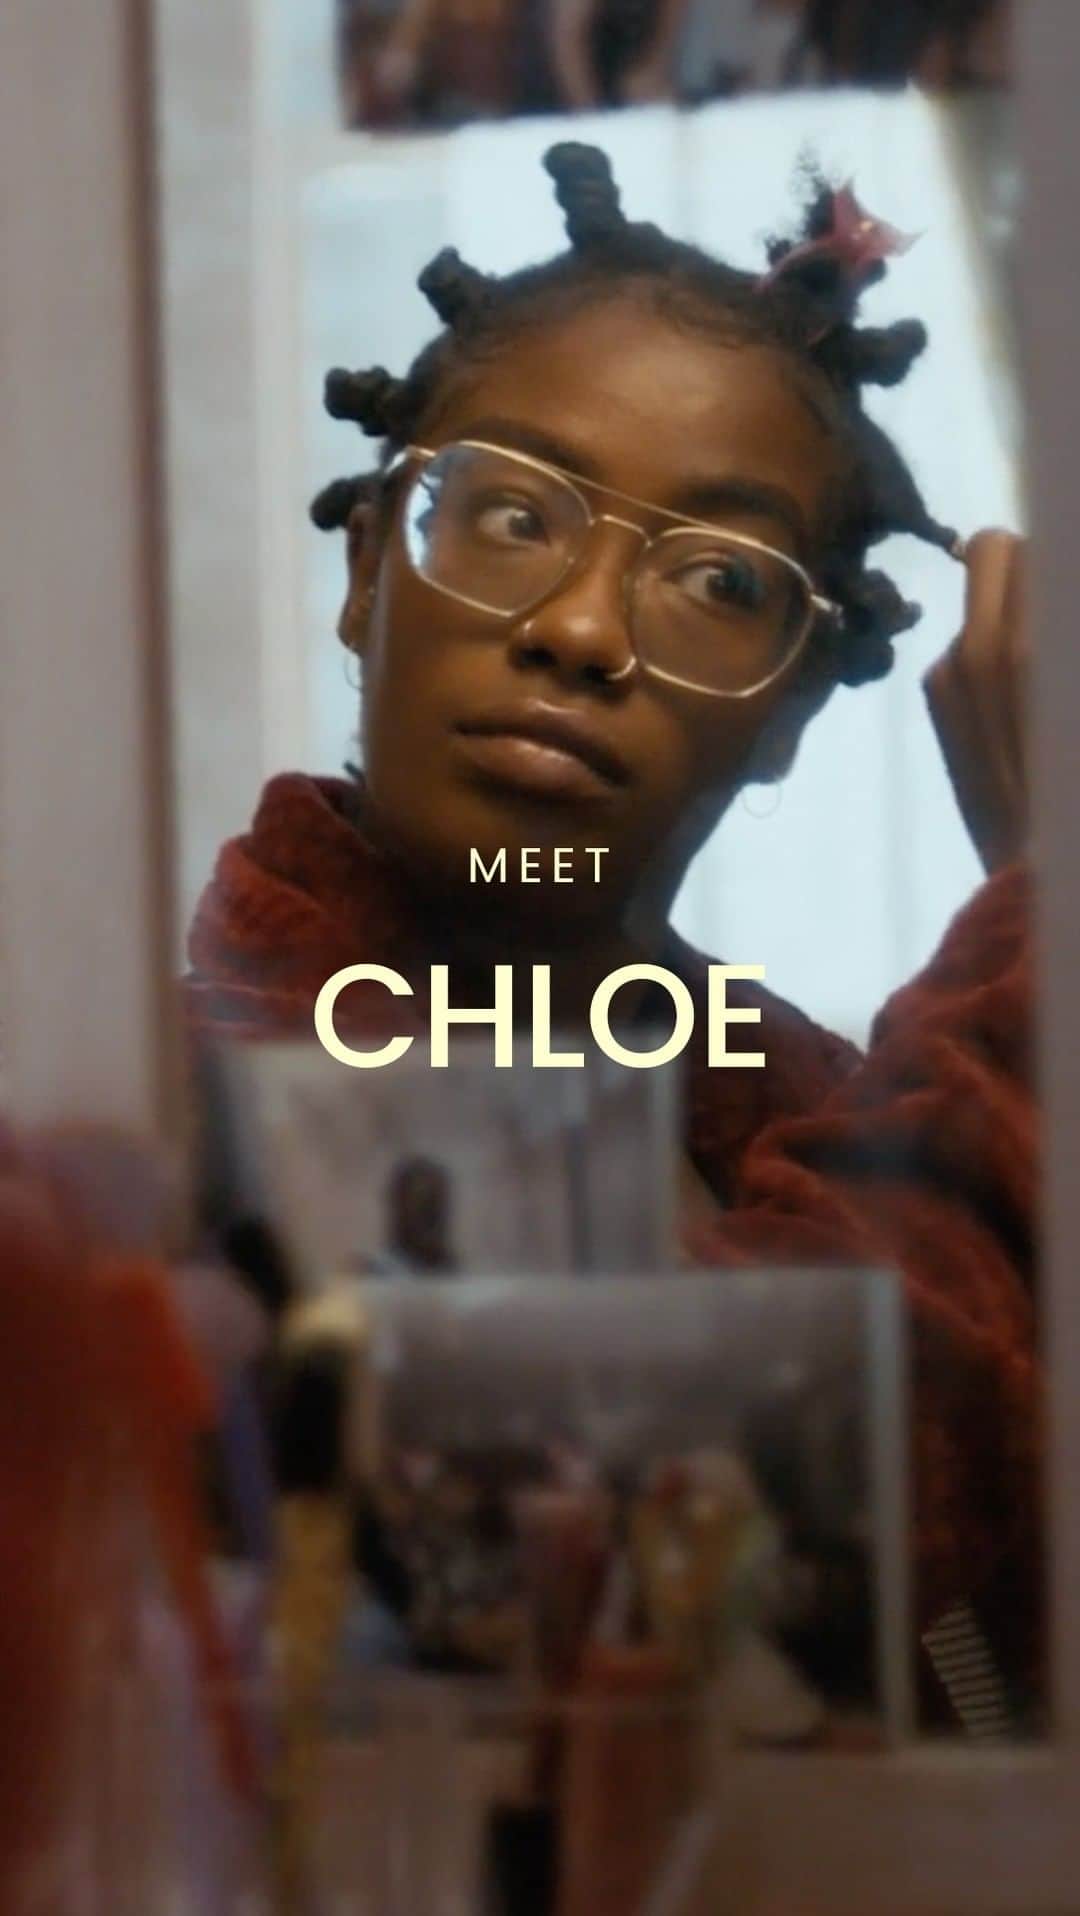 LUSH Cosmeticsのインスタグラム：「“When you change someone’s hair, you tell them that the way that they inherently are is not good enough.” —Chloe  Watch Chloe share her own natural hair journey, directed by the award-winning @aliciakharris_.  Watch Naturally, the full documentary: https://youtu.be/QS5F5i3oS3M  Take action to support The CROWN Act and end hair discrimination: USA: https://p2a.co/ueUtBN3 CDN: https://p2a.co/tuekkv4  #hair #curls #naturalhair #Blackhair #Blackhistory #selflove #Blackisbeautiful #PassTheCROWN」